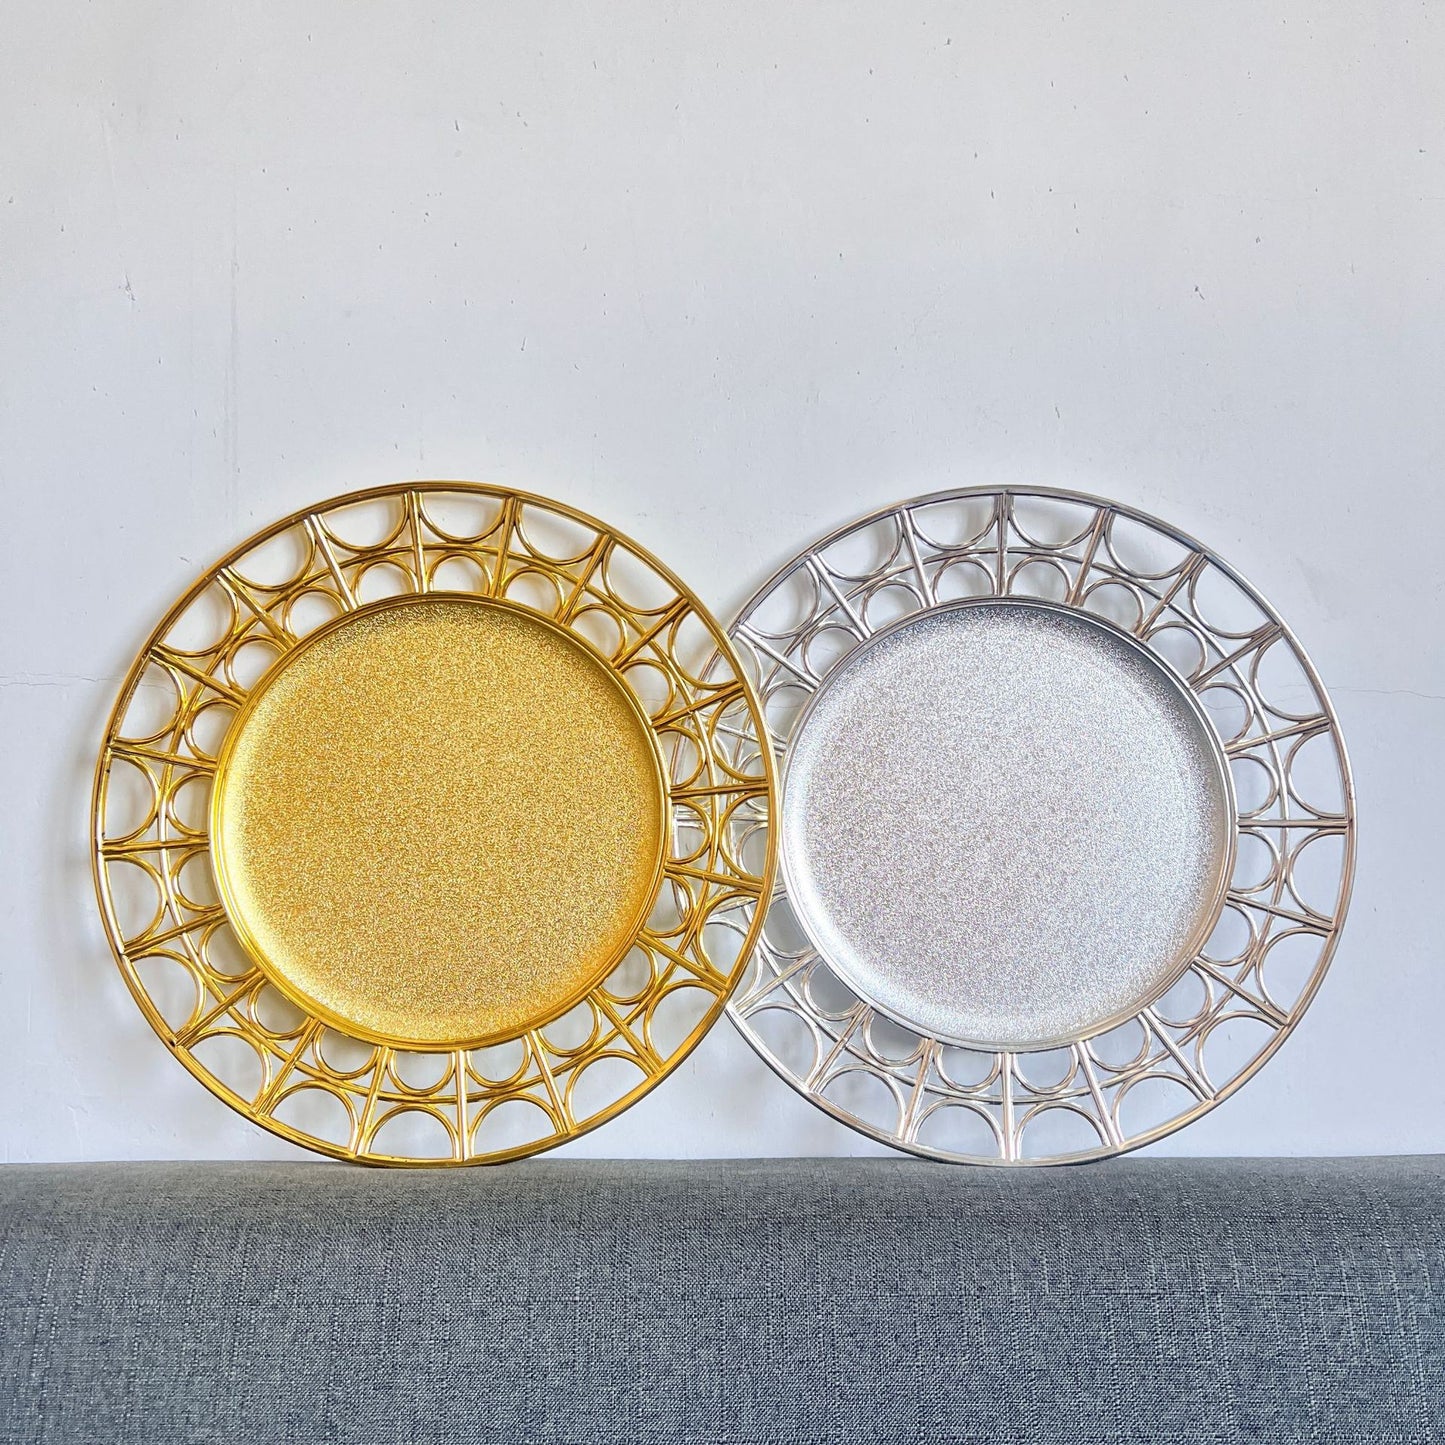 Uniquelina 13-Inch Charger Plates , Gold Textured Rim, for Elegant Dining - Ideal for Weddings and Formal Events